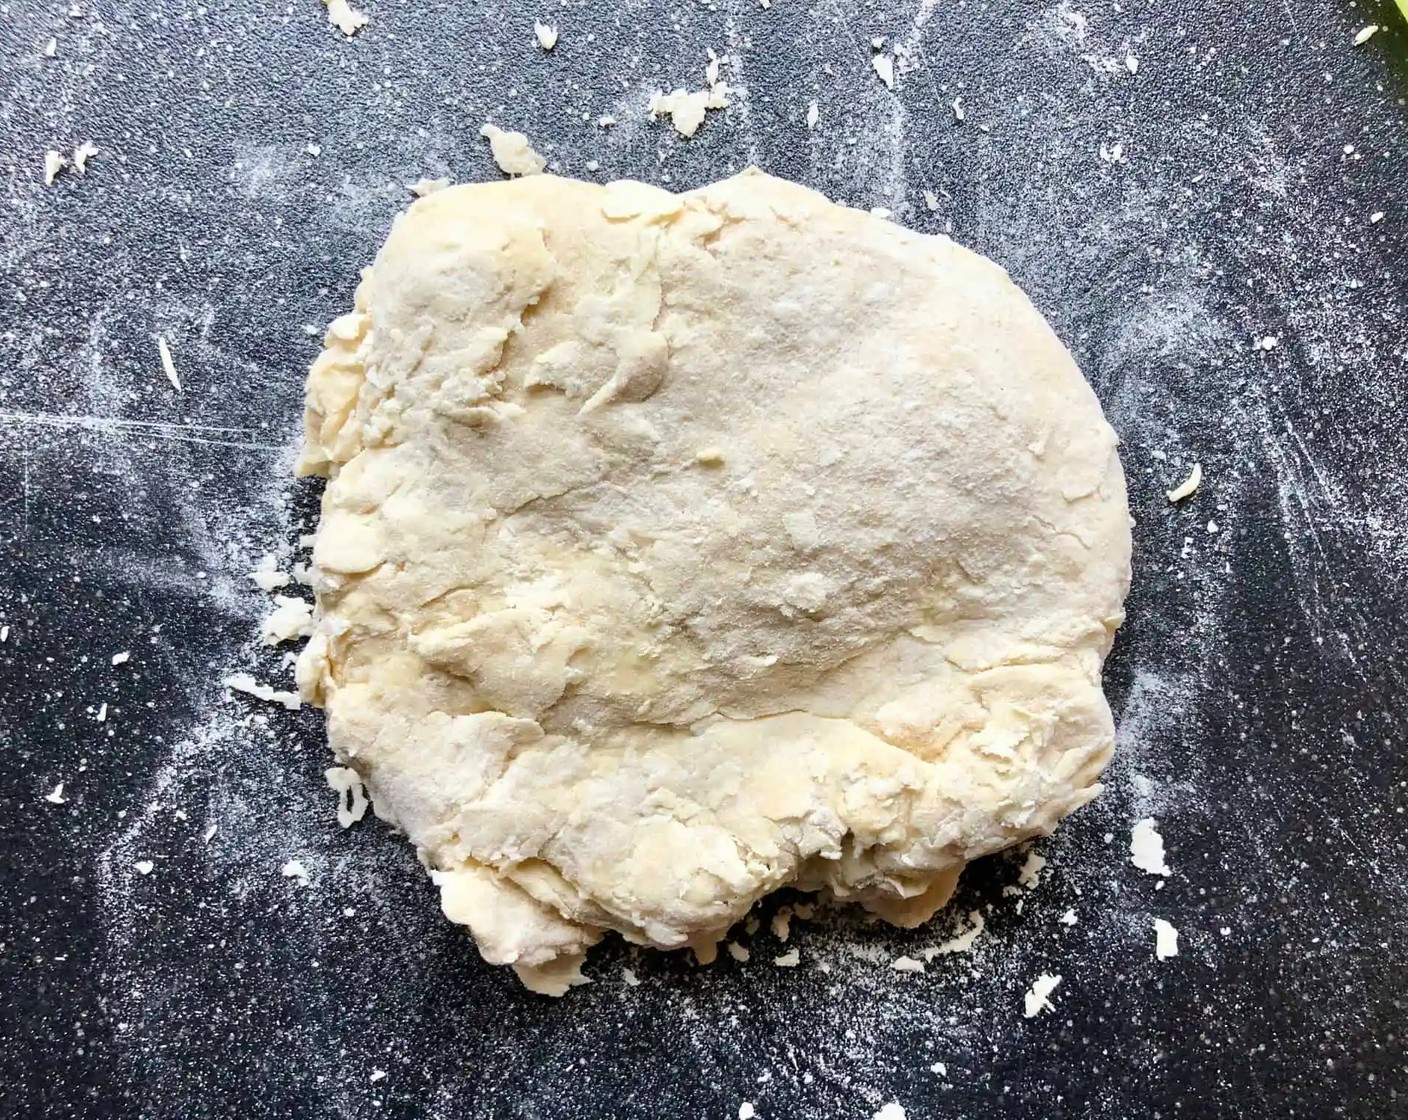 step 4 Turn the dough onto the counter and knead for 3-5 minutes. The dough should be firm but silky smooth when you are done. If your dough is too tacky as you knead it, sprinkle with a little extra flour.